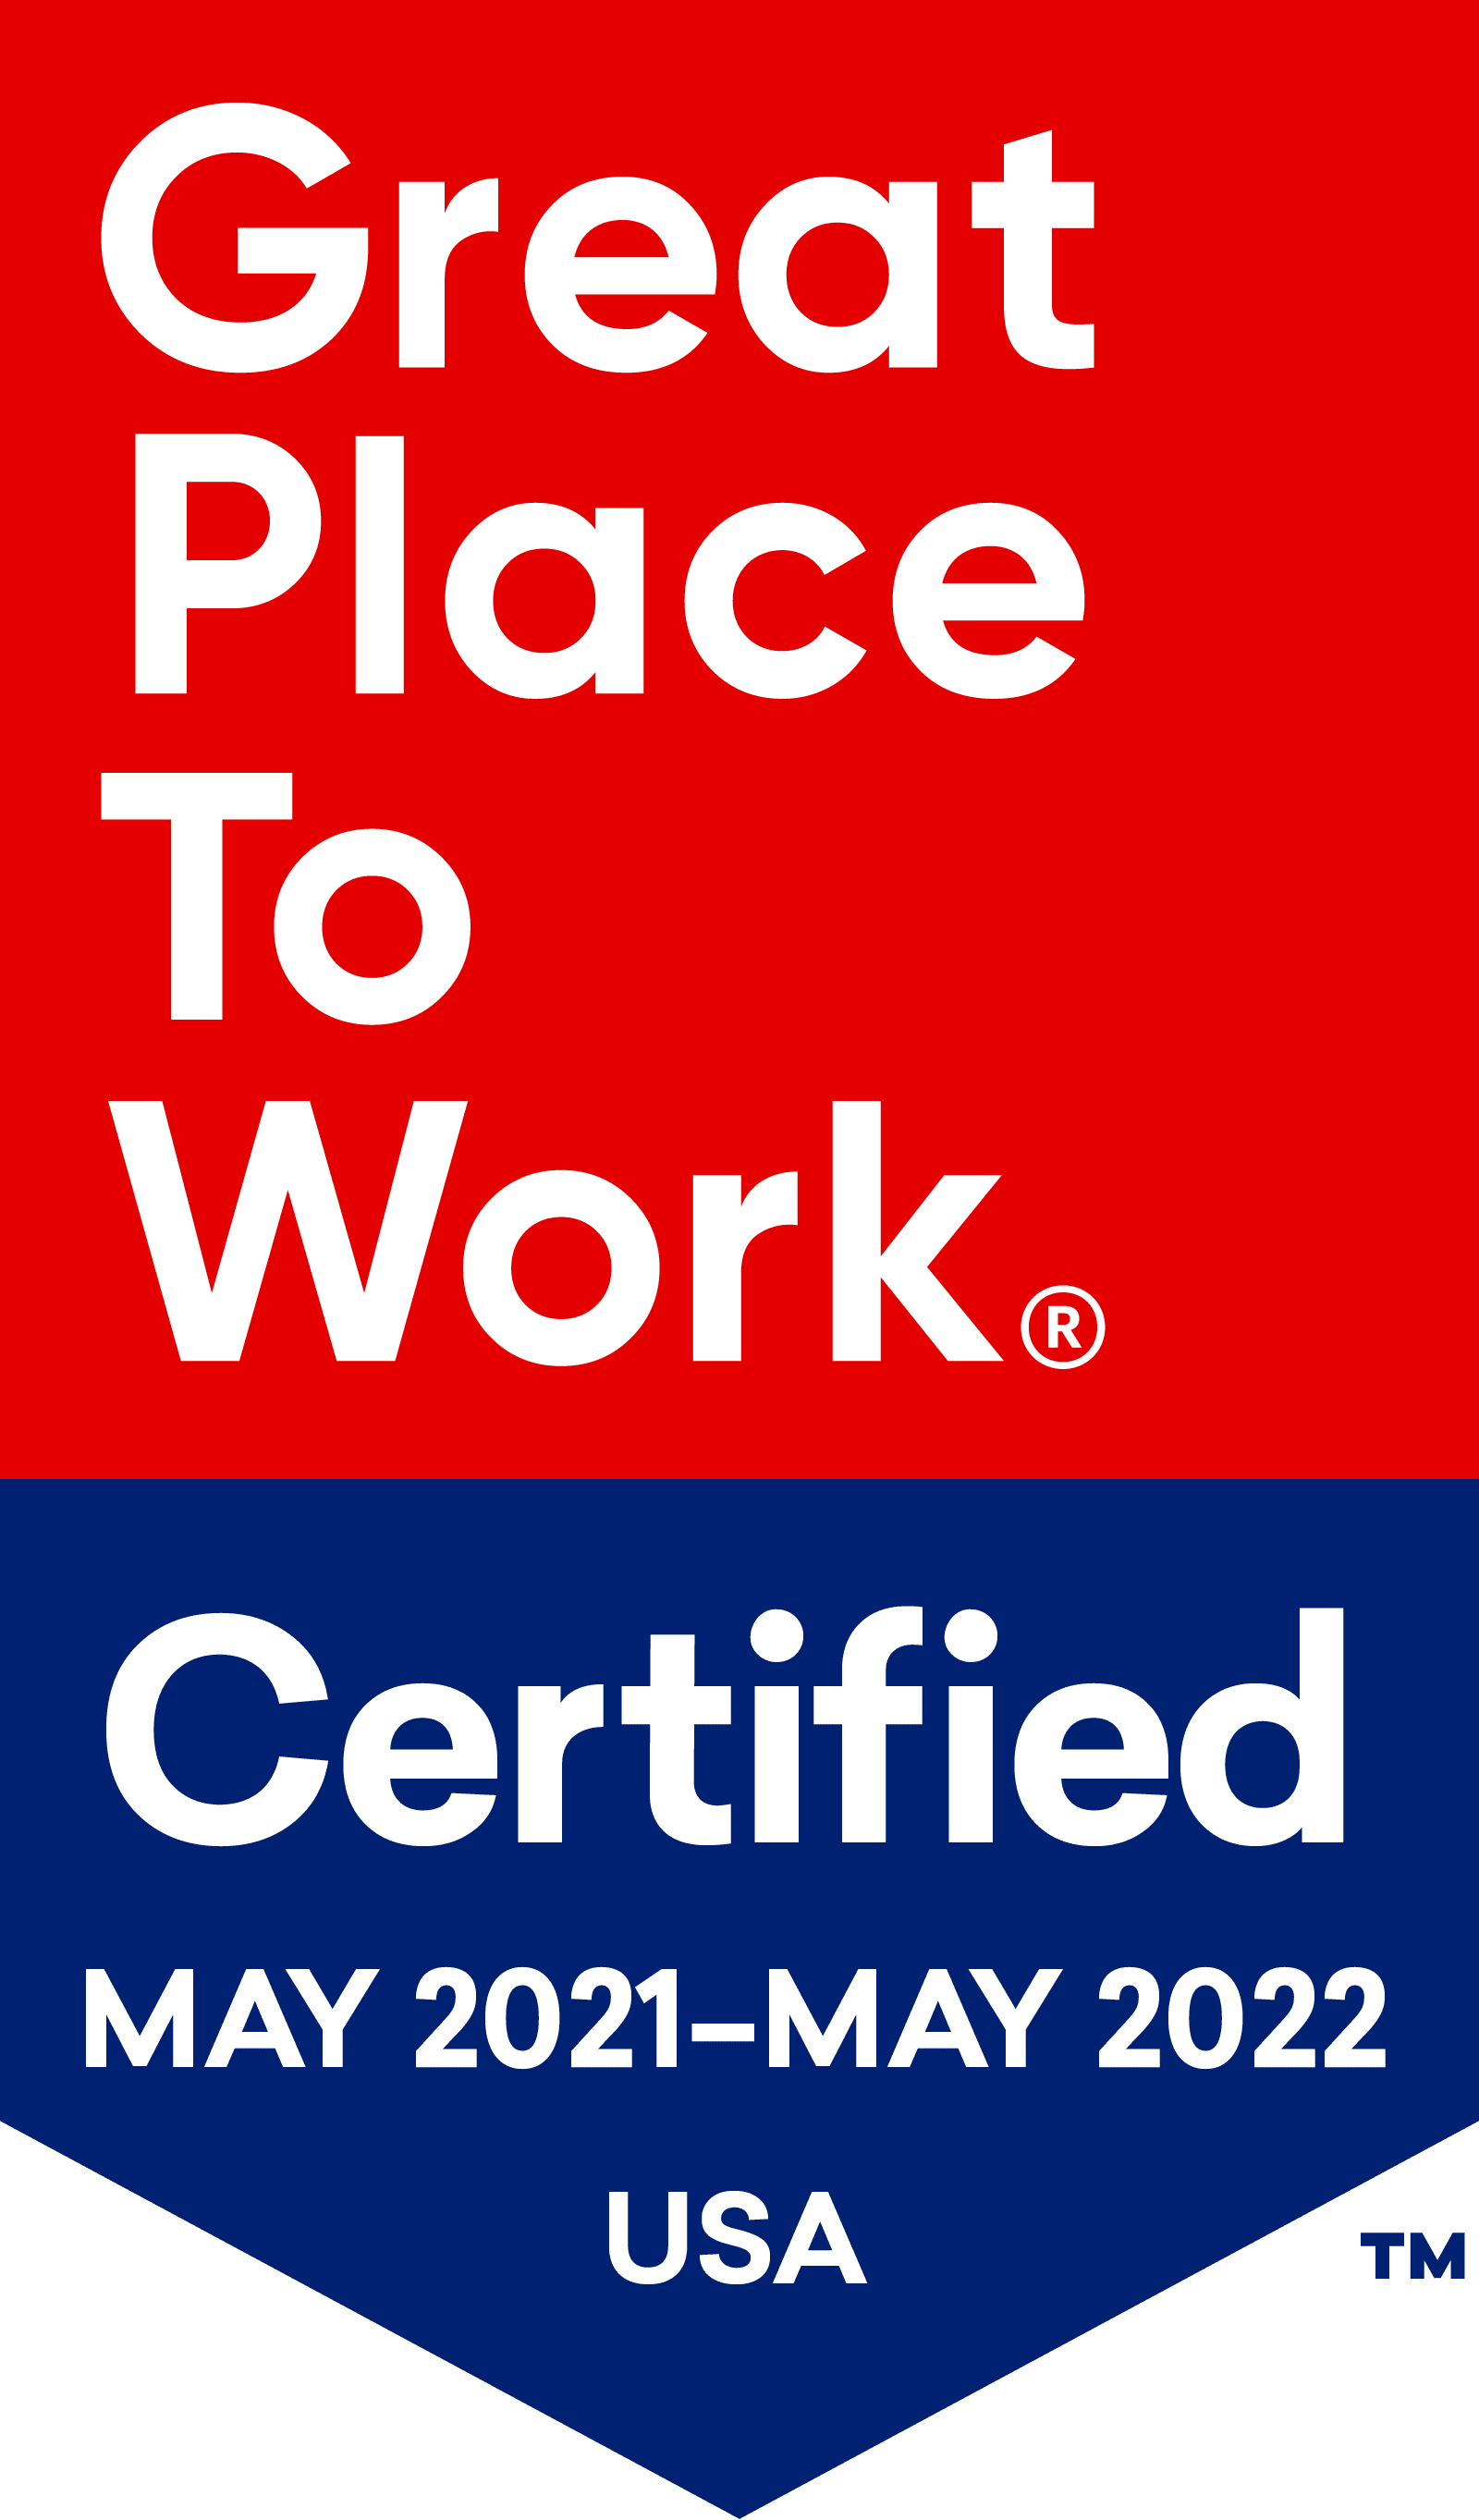 Cottonwood Creek is Great Place To Work Certified